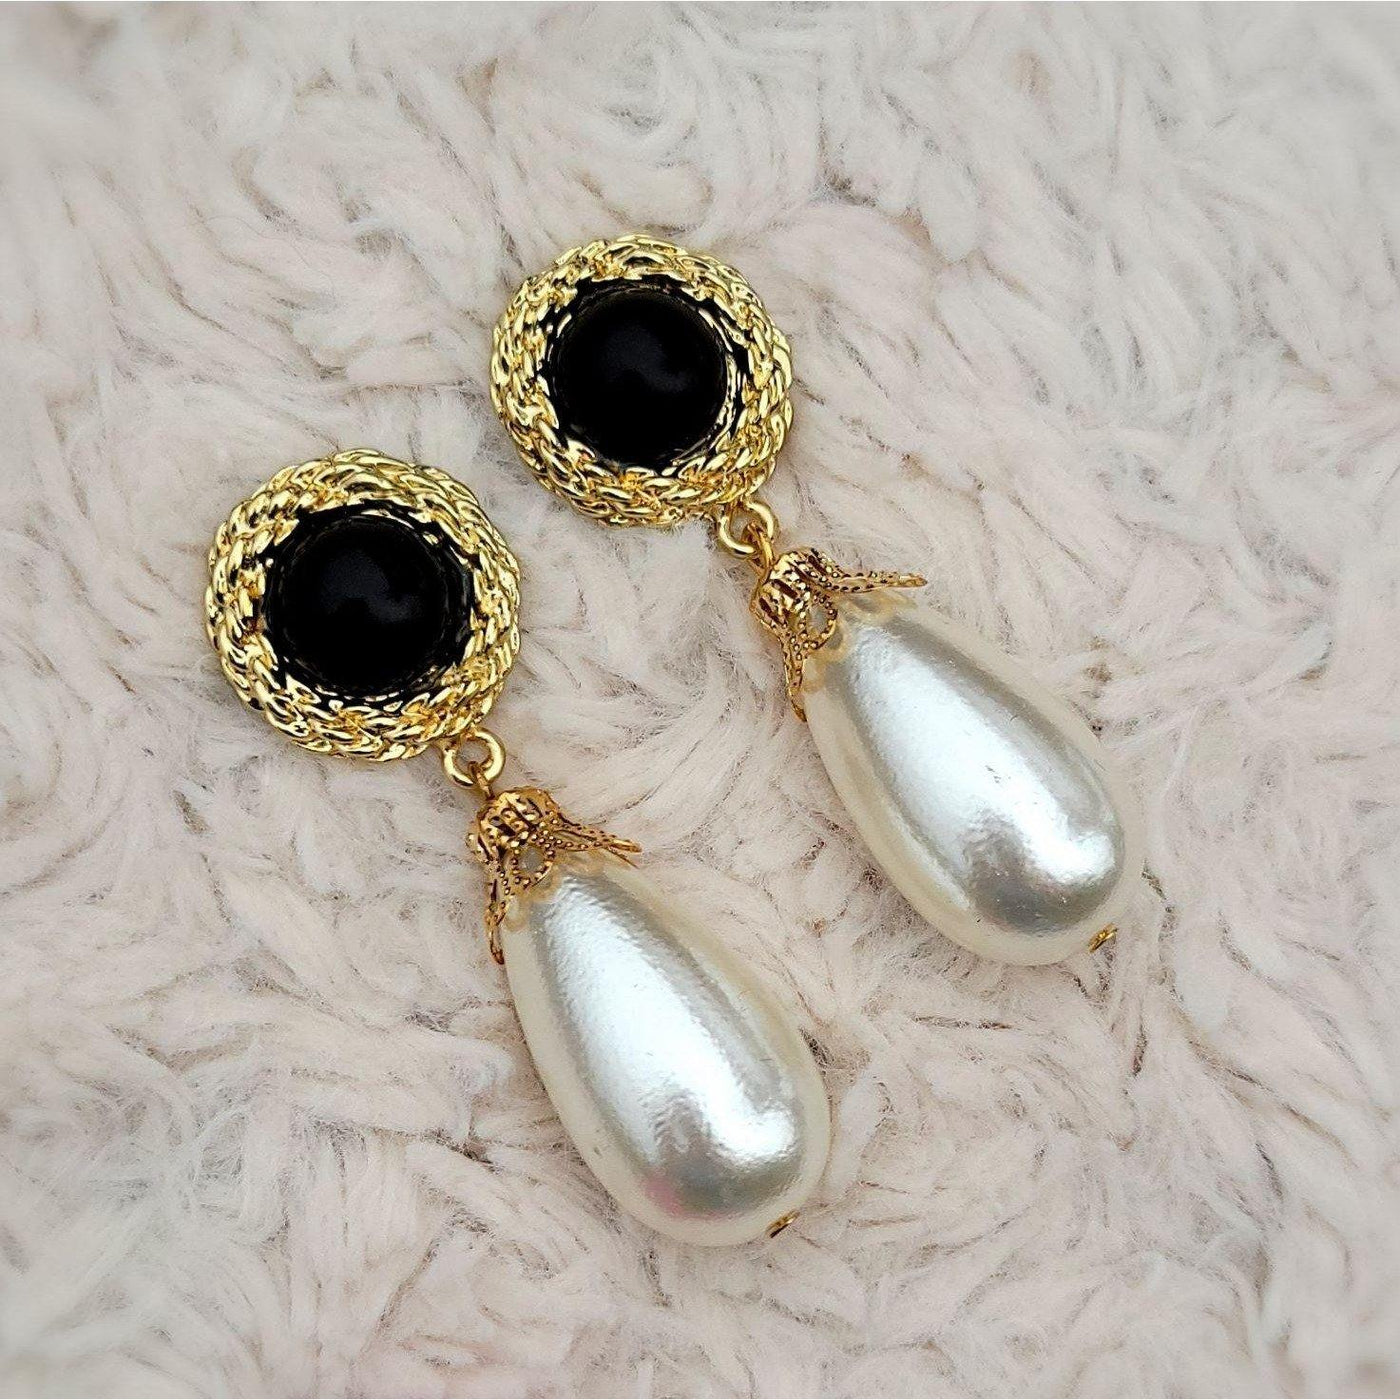 NEW Ivory Faux Pearl Drop Earrings with Black Circle Gem and Gold Hardware - 2" - Accessories - dalia + jade 